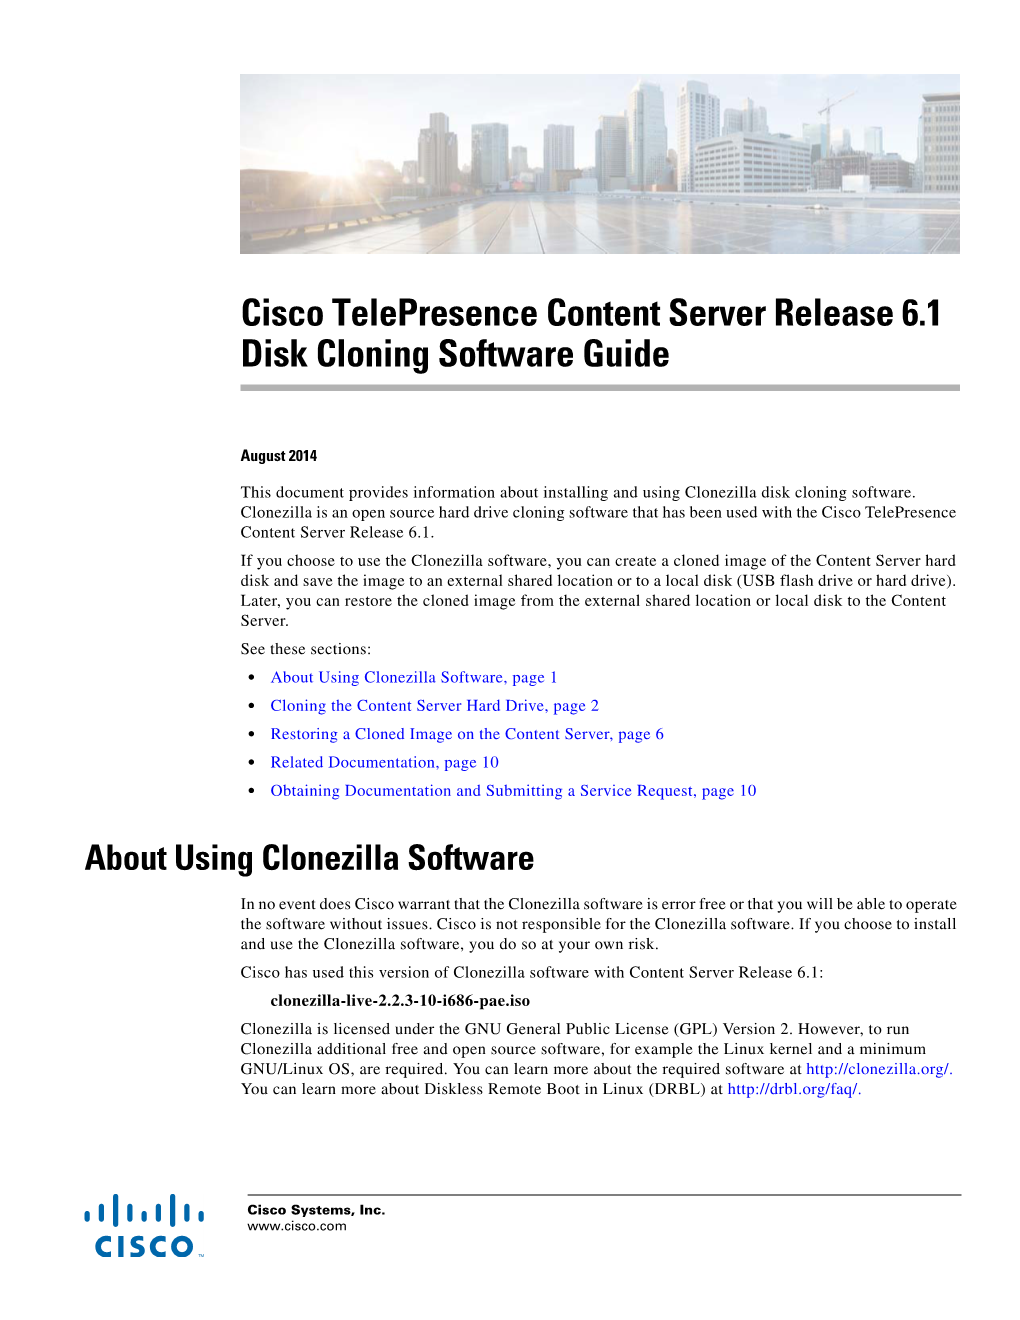 Cisco Telepresence Content Server Release 6.1 Disk Cloning Software Guide